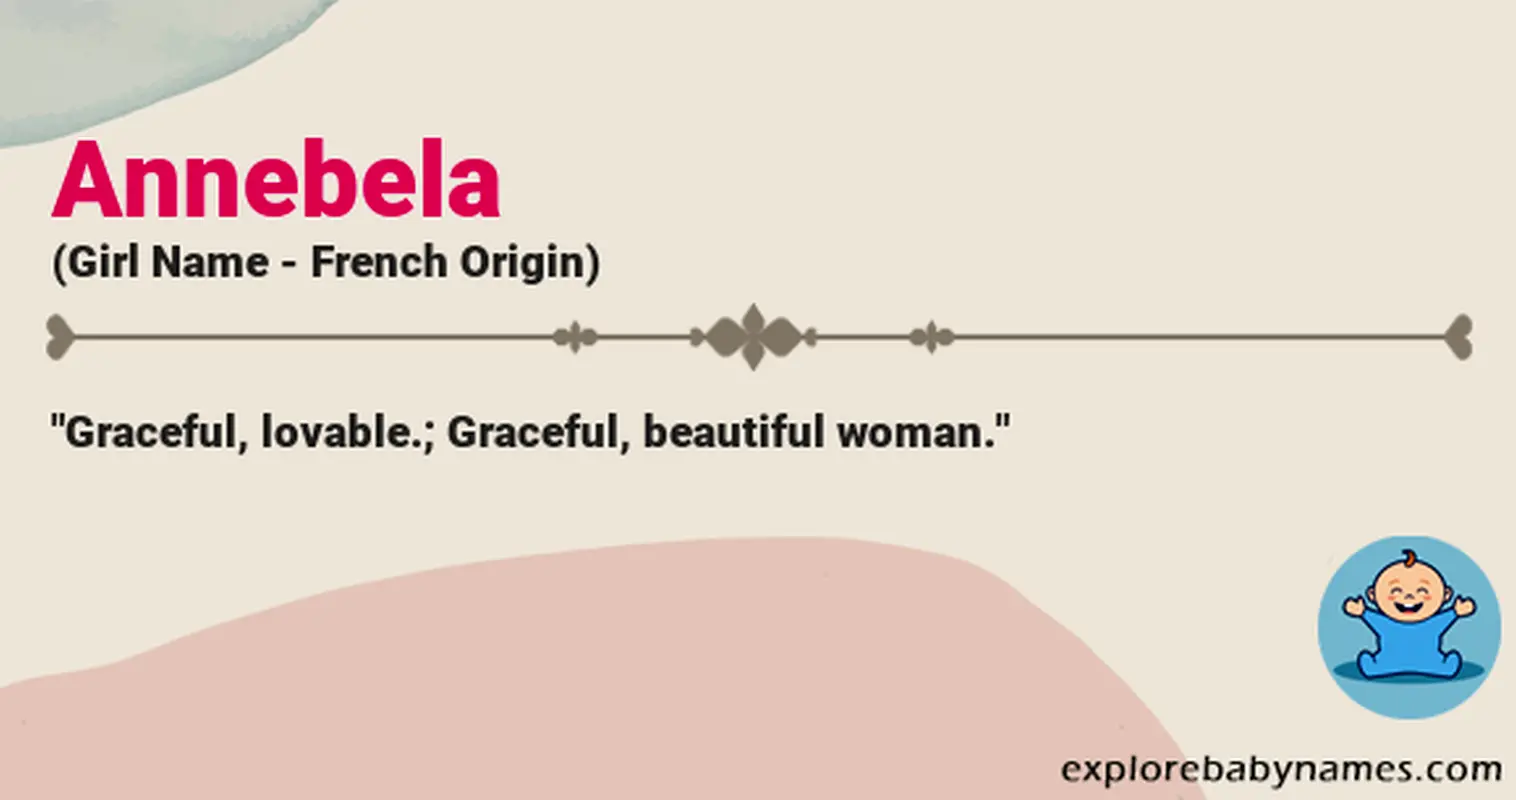 Meaning of Annebela